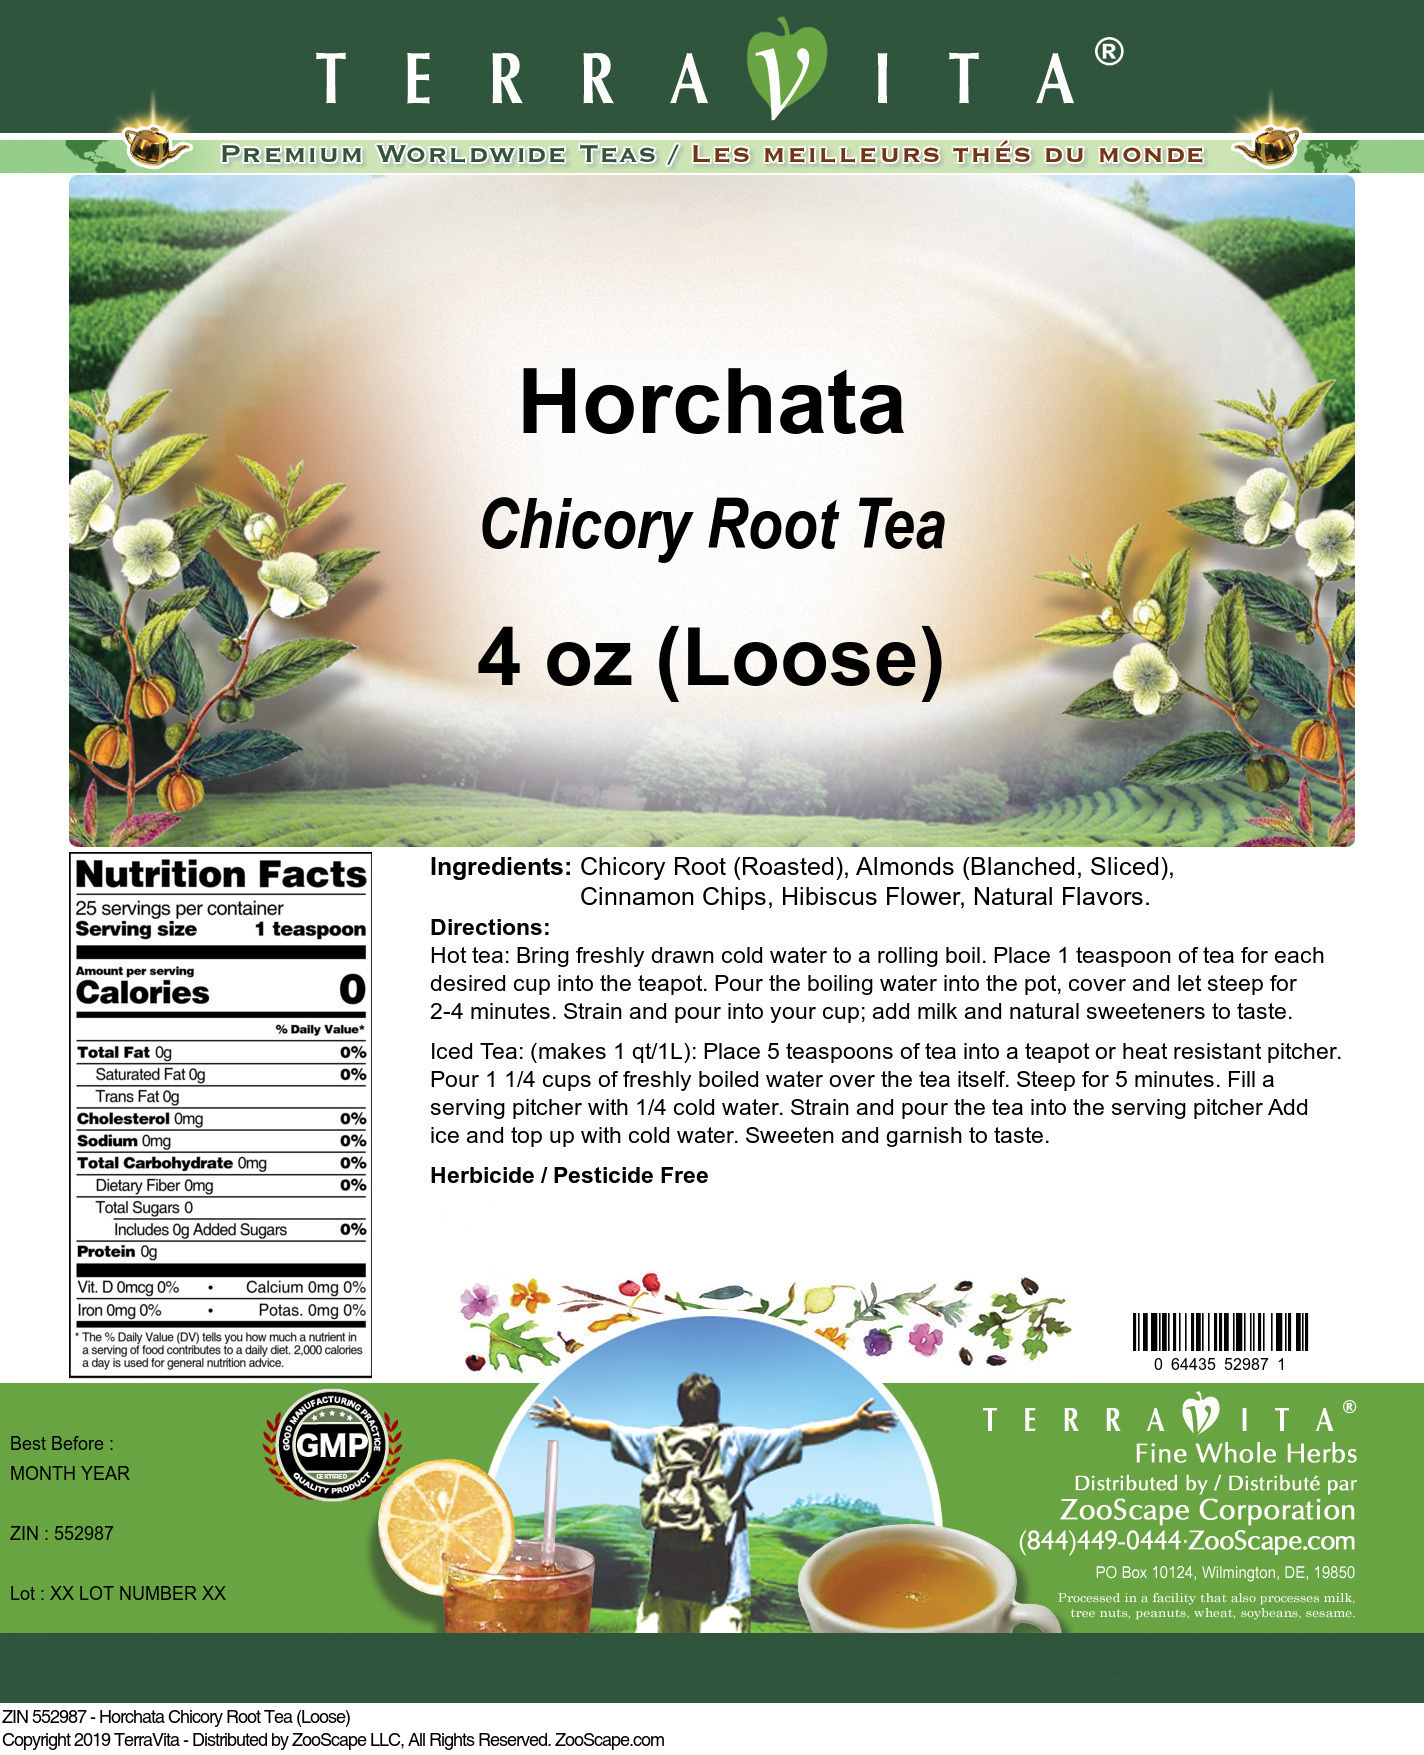 Horchata Chicory Root Tea (Loose) - Label